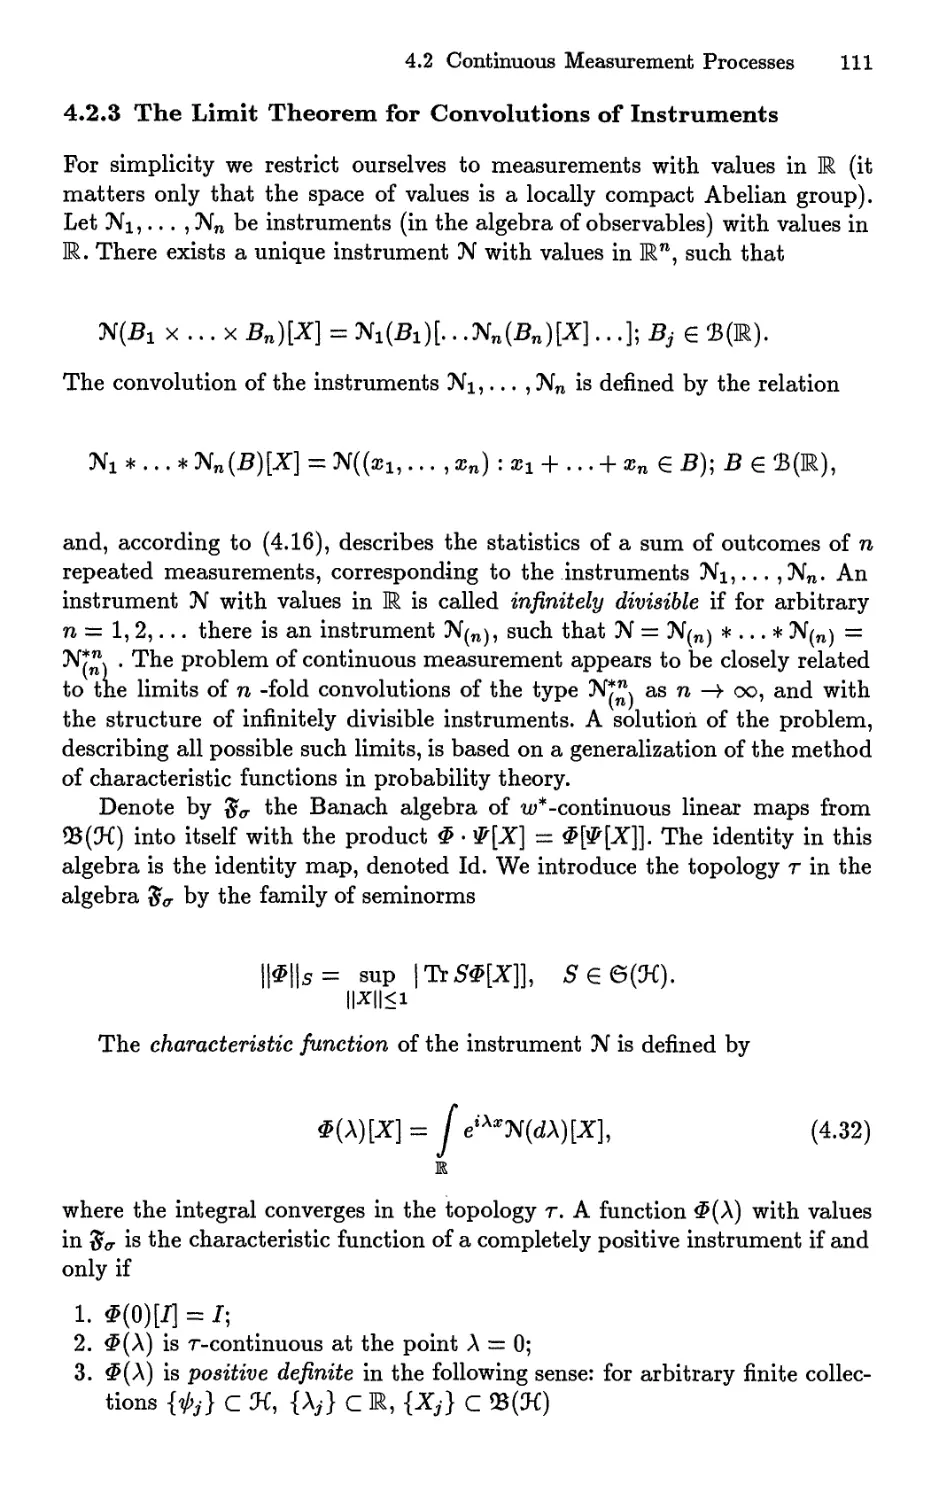 4.2.3 The Limit Theorem for Convolutions of Instruments